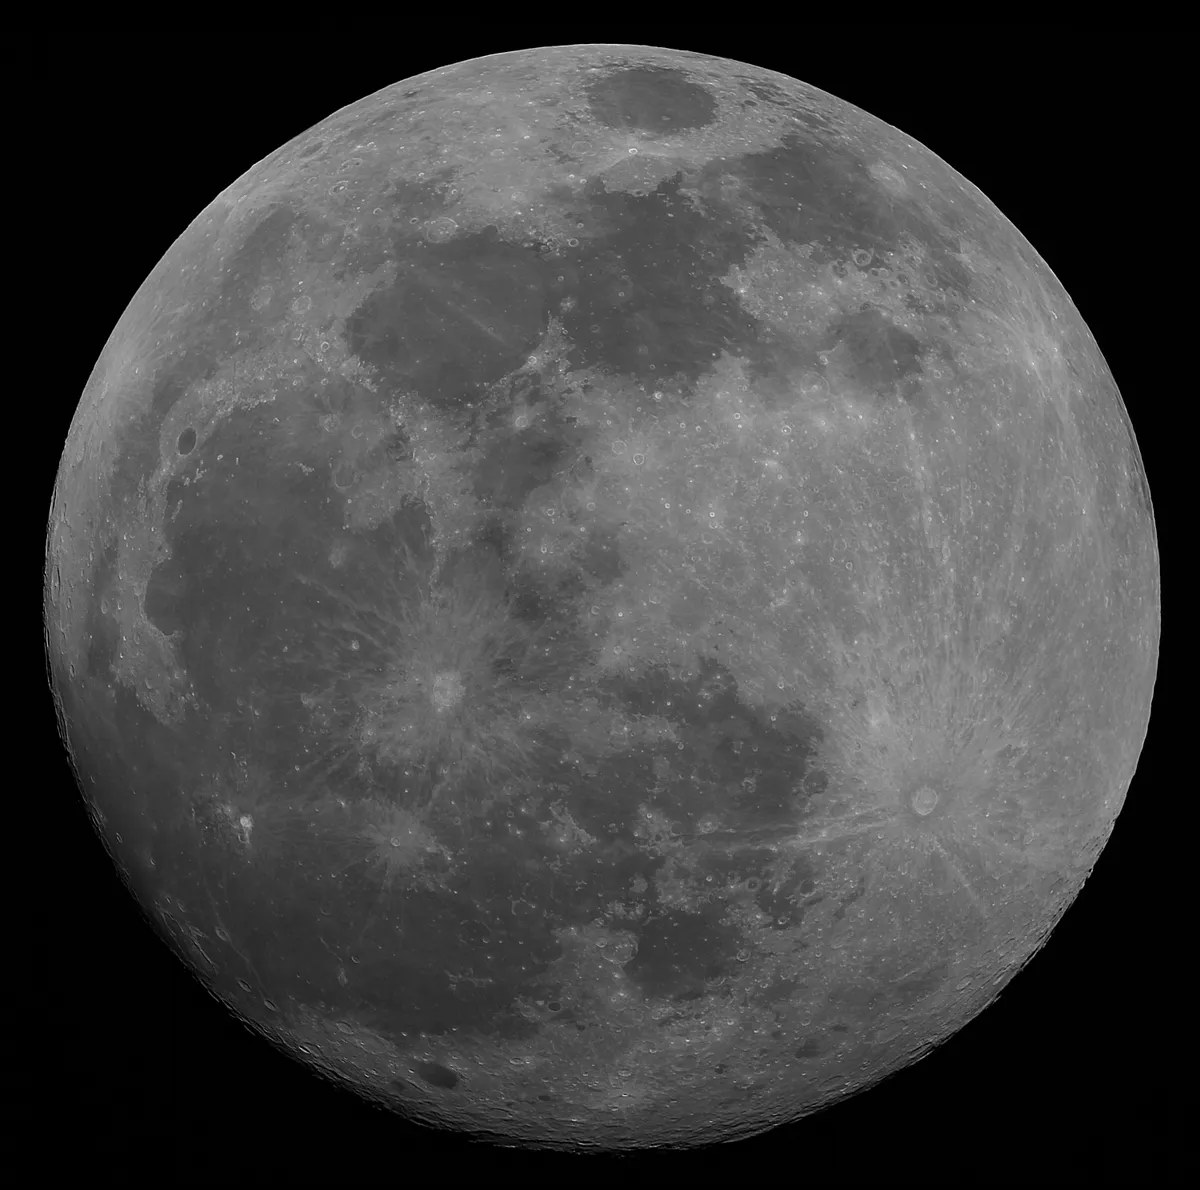 Moon on the 13th May 2014 by Neill Mitchell, Wimborne, Dorset, UK. Equipment: Skywatcher 300P SynScan Goto, Canon 7D at prime focus.